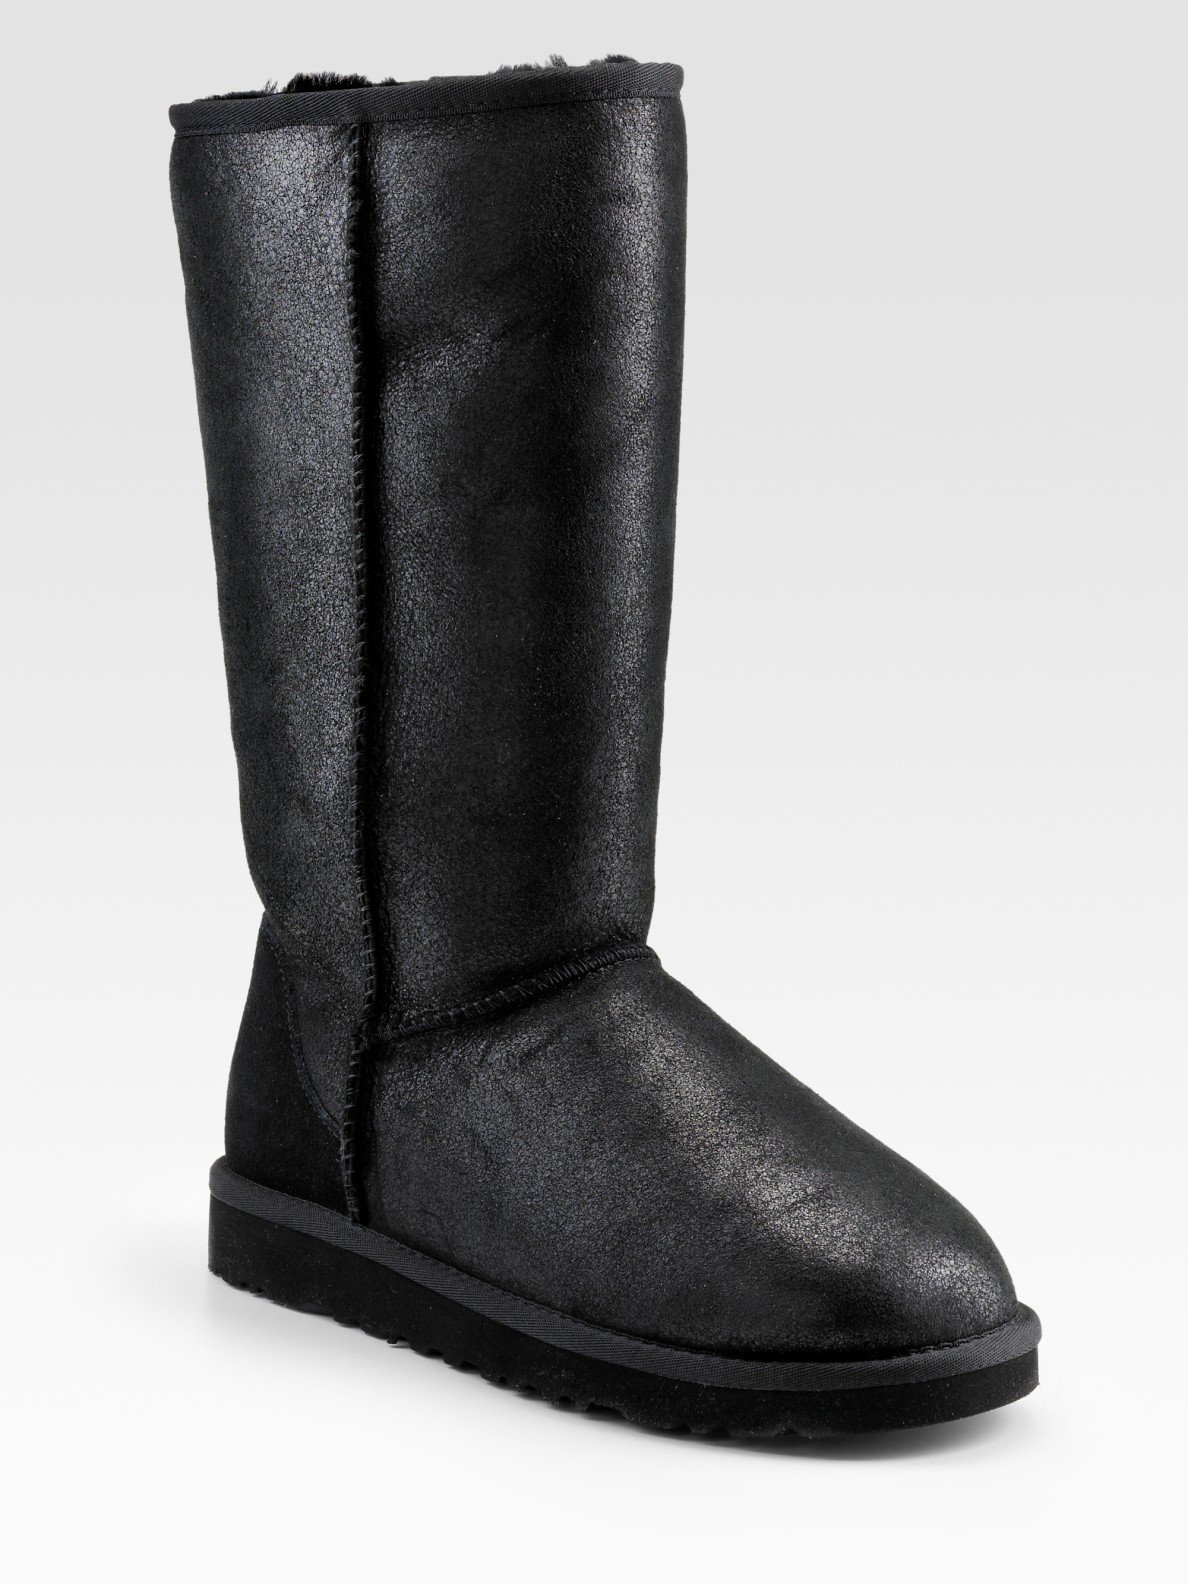 ugg tall black leather boots